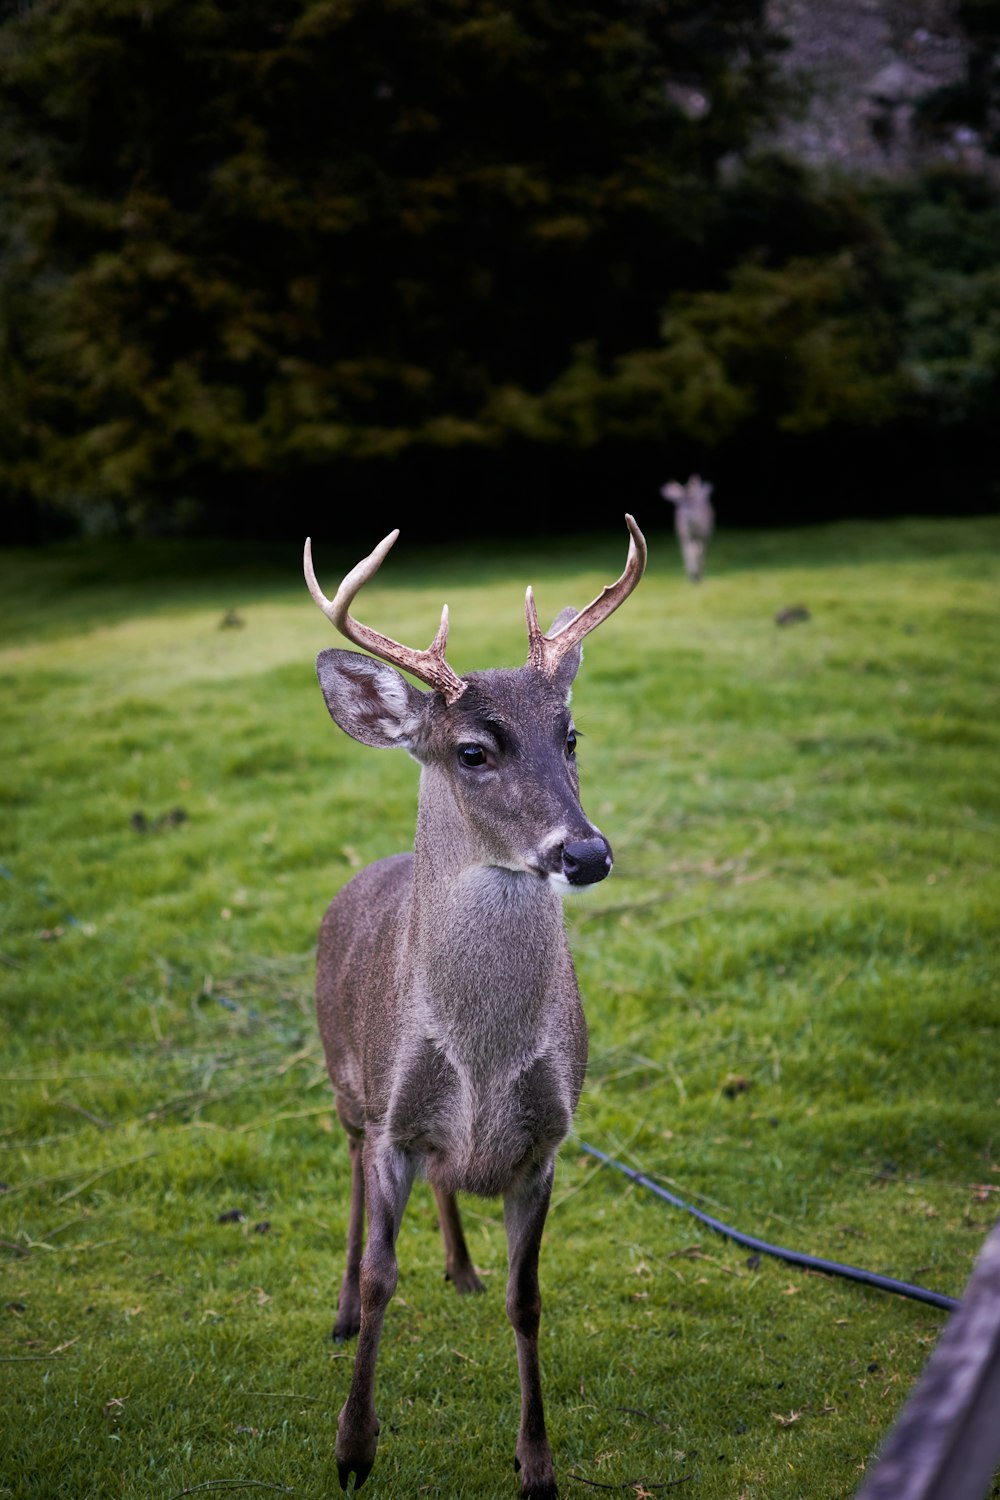 a deer with antlers standing in a grassy field